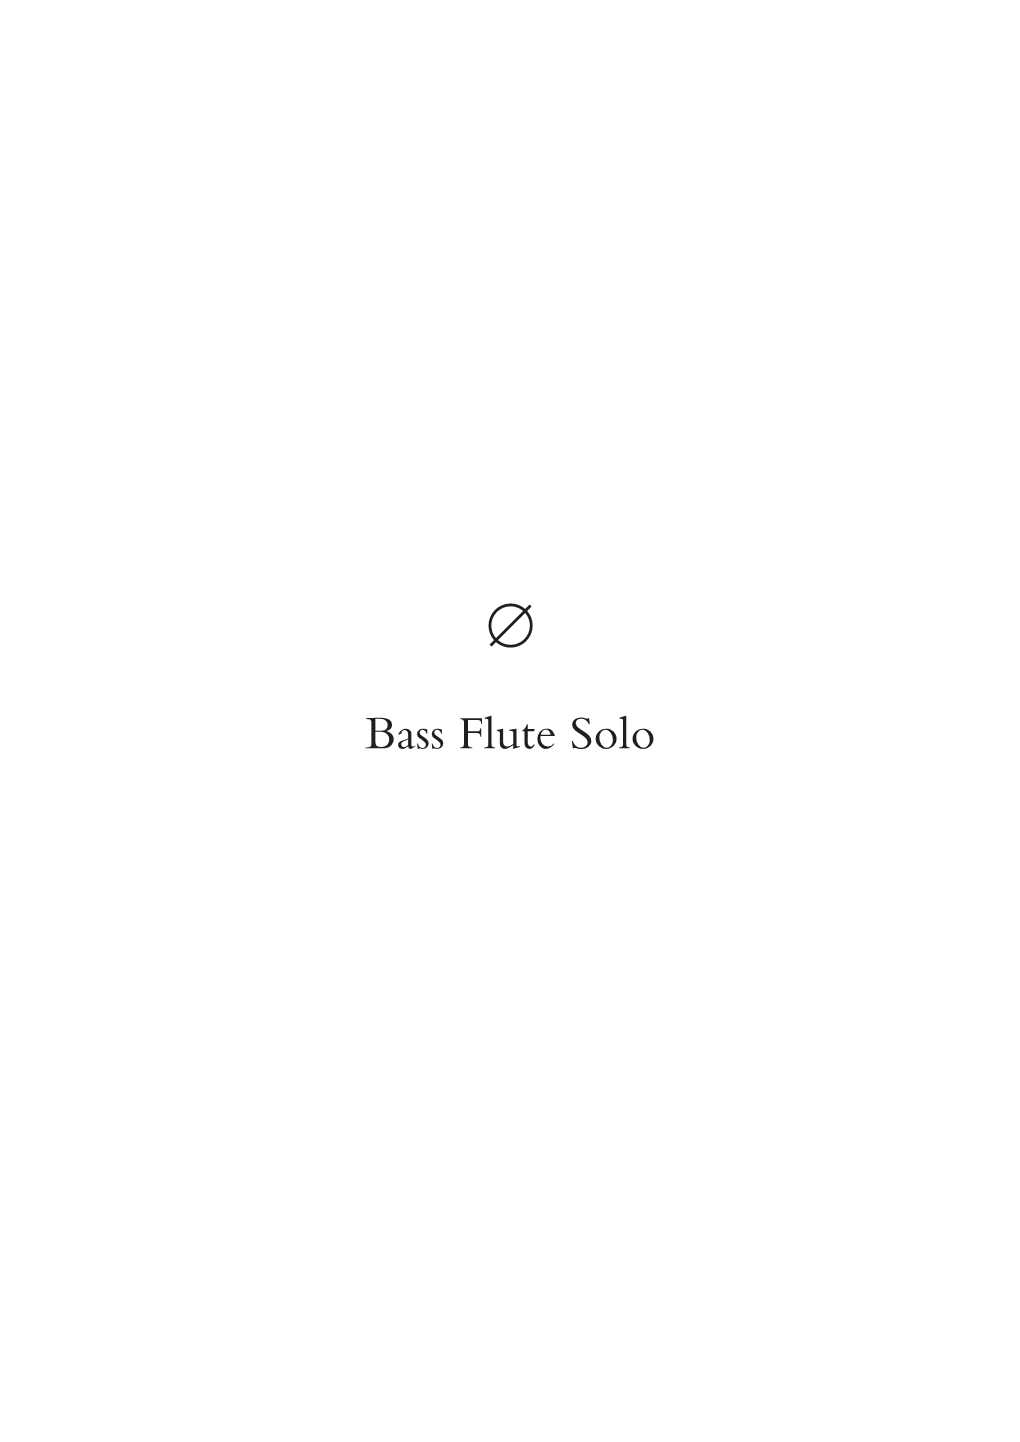 Bass Flute Solo ∅ Structure